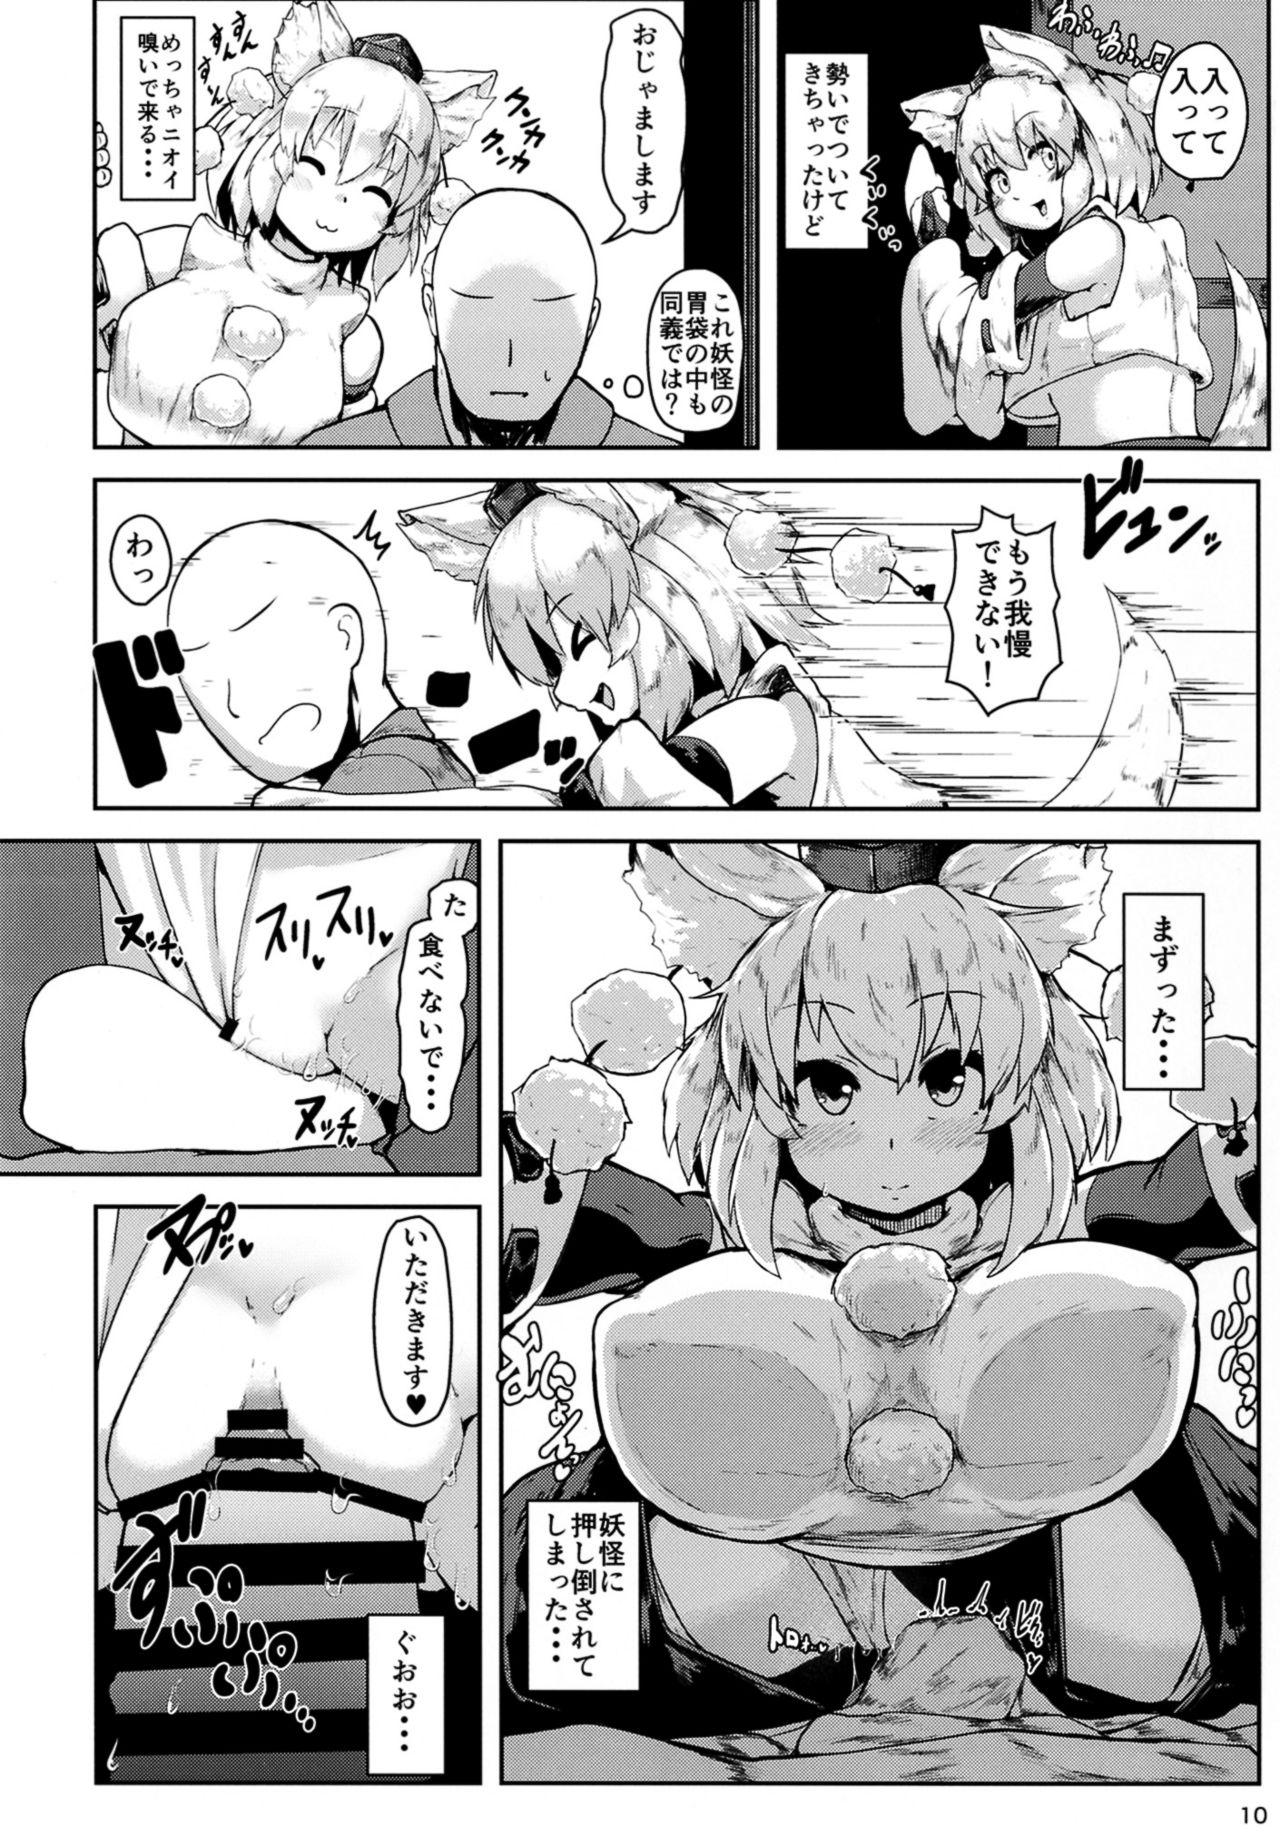 Interracial Porn Oppai Momiji - Touhou project Cams - Page 10